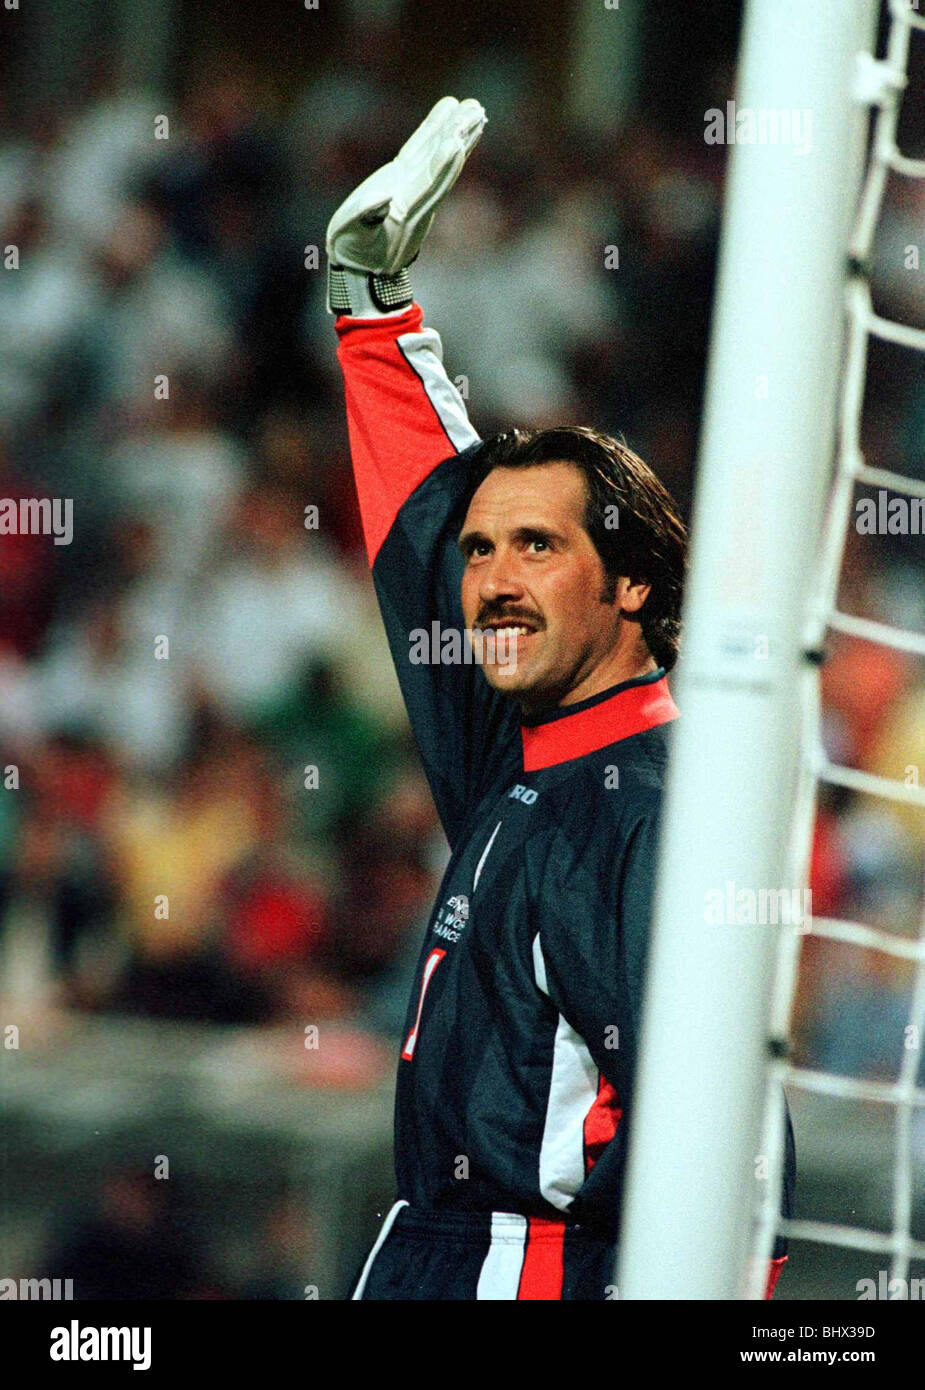 England's goalkeeper David Seaman celebrates after England beat Colombia in Lens June 26. England won their group G match 2-0 and advance to the next round. Stock Photo